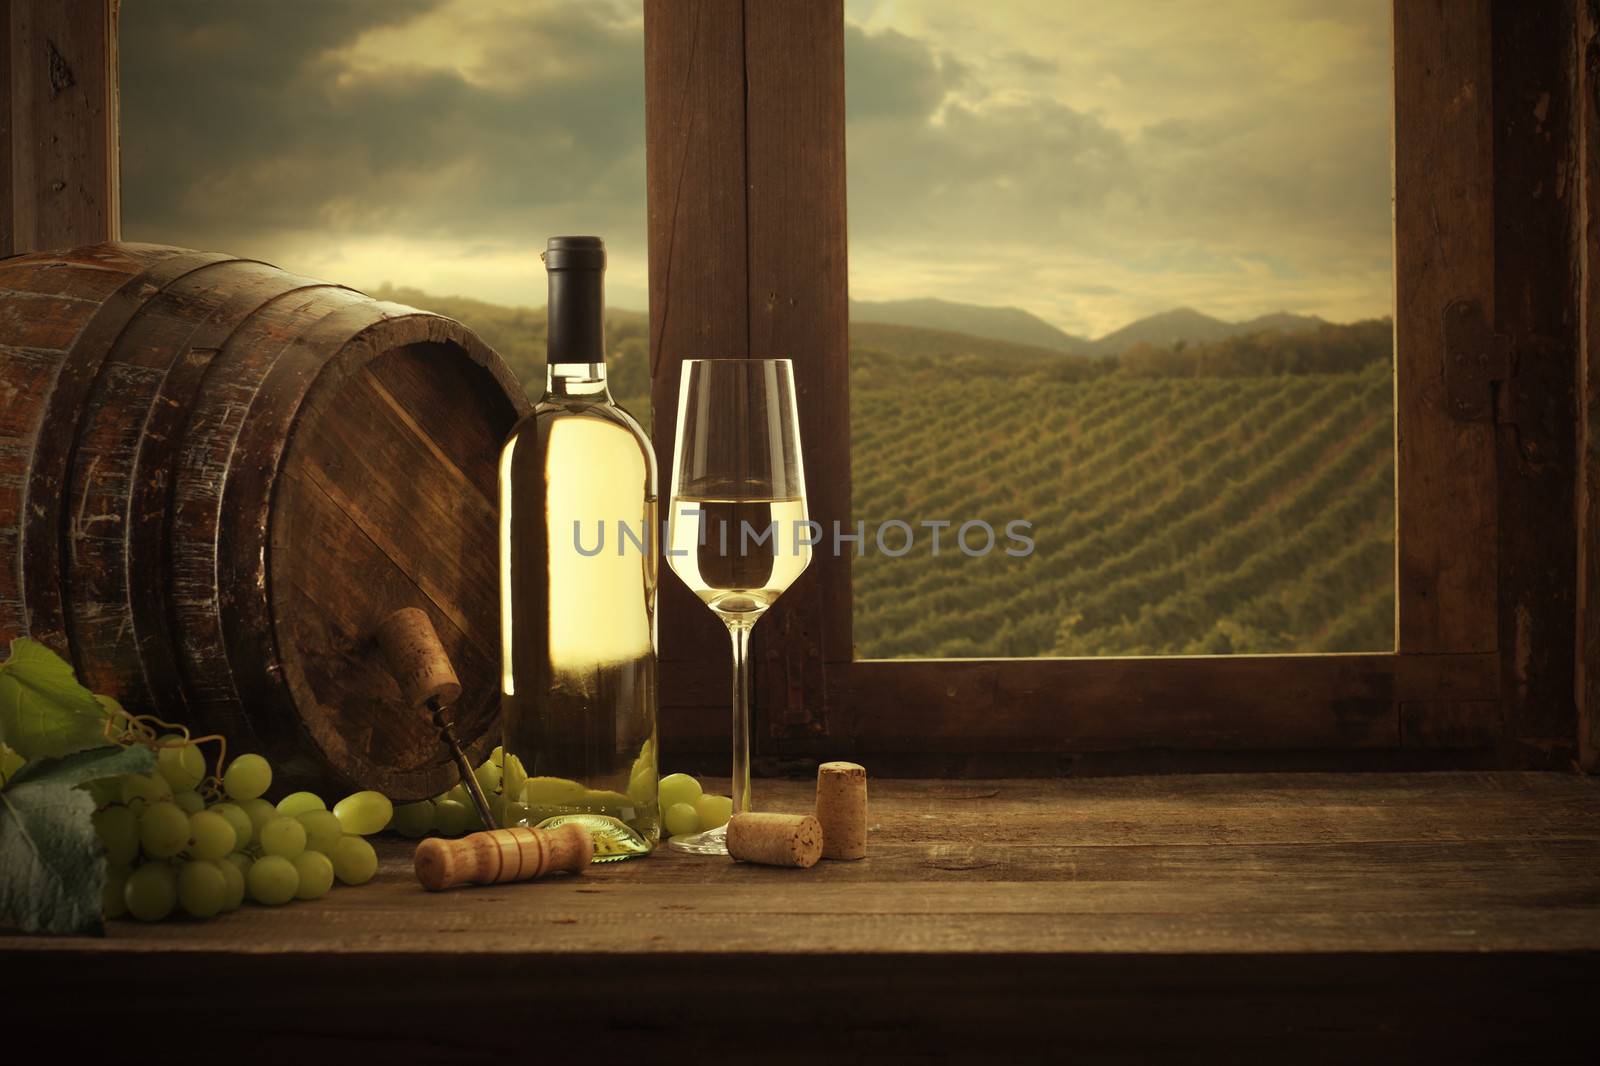 Wine bottle and wineglass on wooden table, vineyard on background